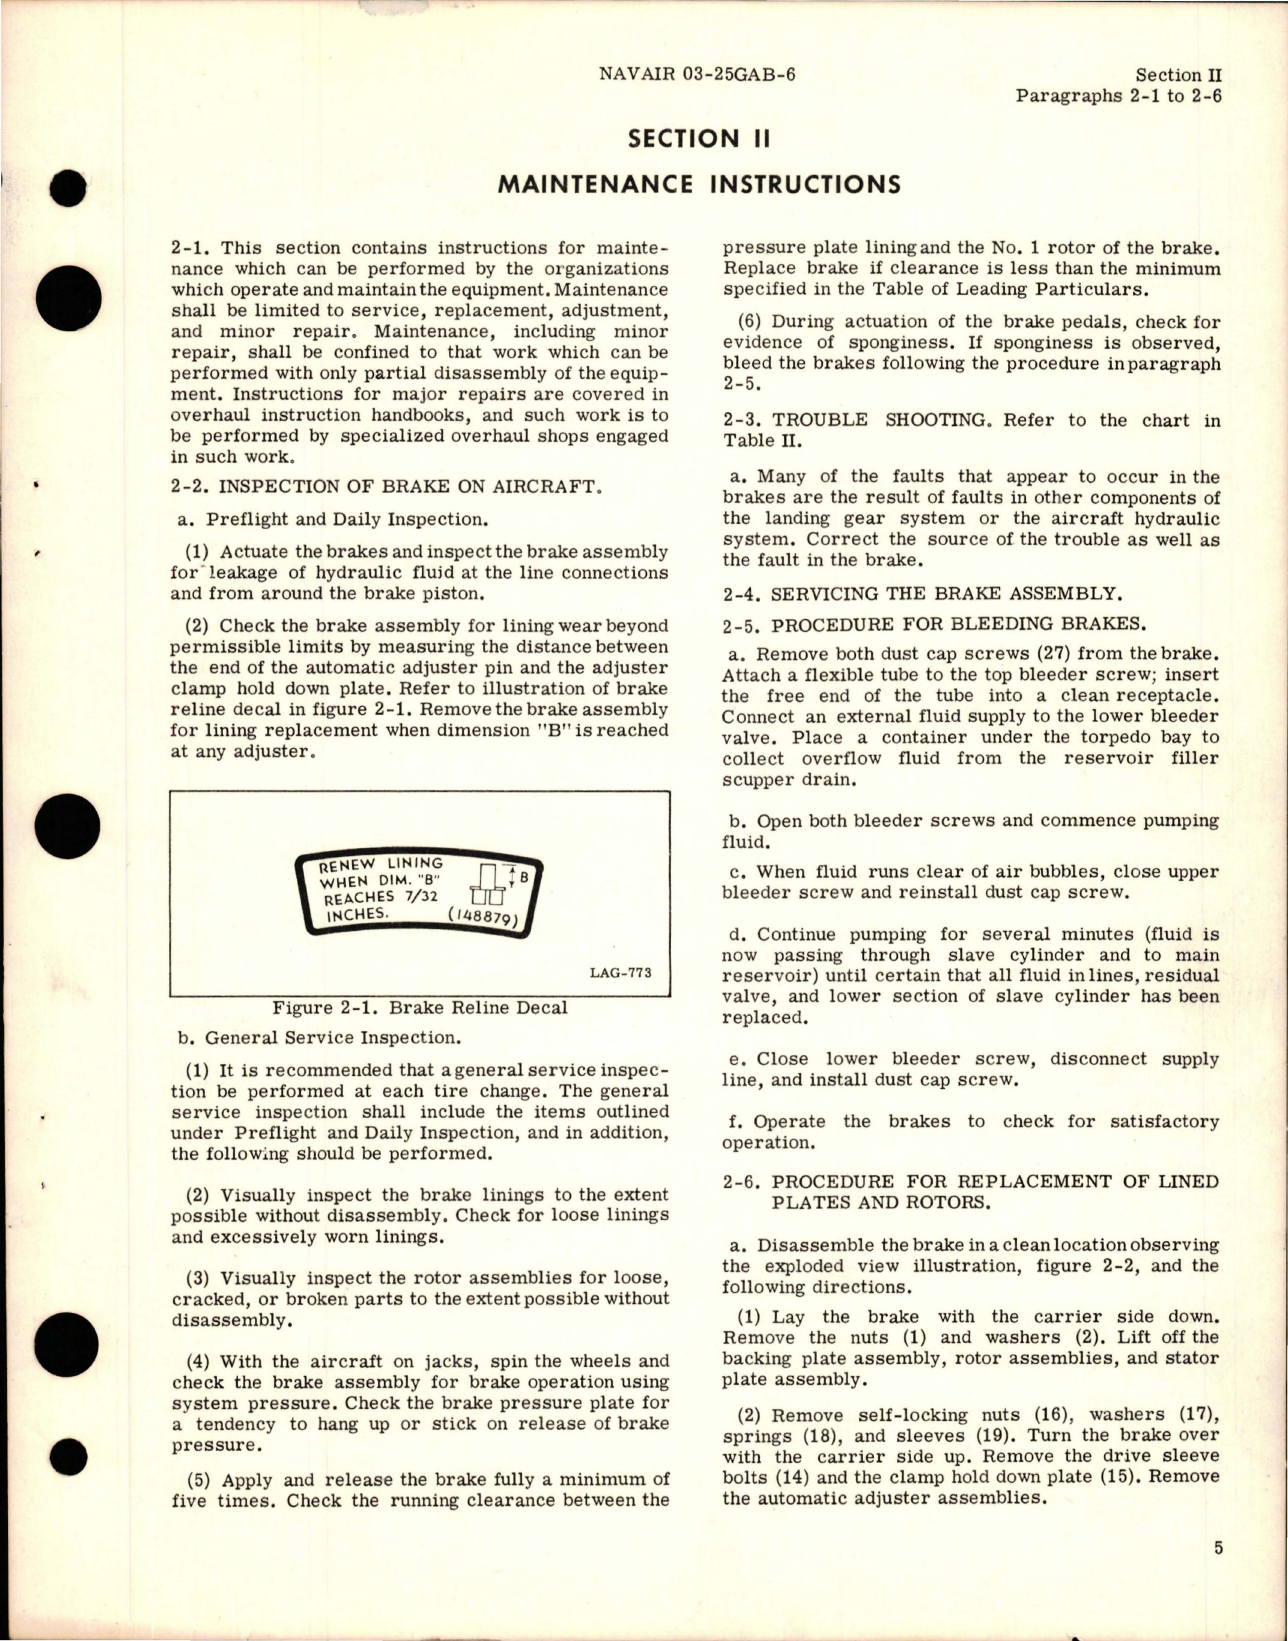 Sample page 9 from AirCorps Library document: Operation and Maintenance Instructions for Main Landing Gear Brake Assemblies